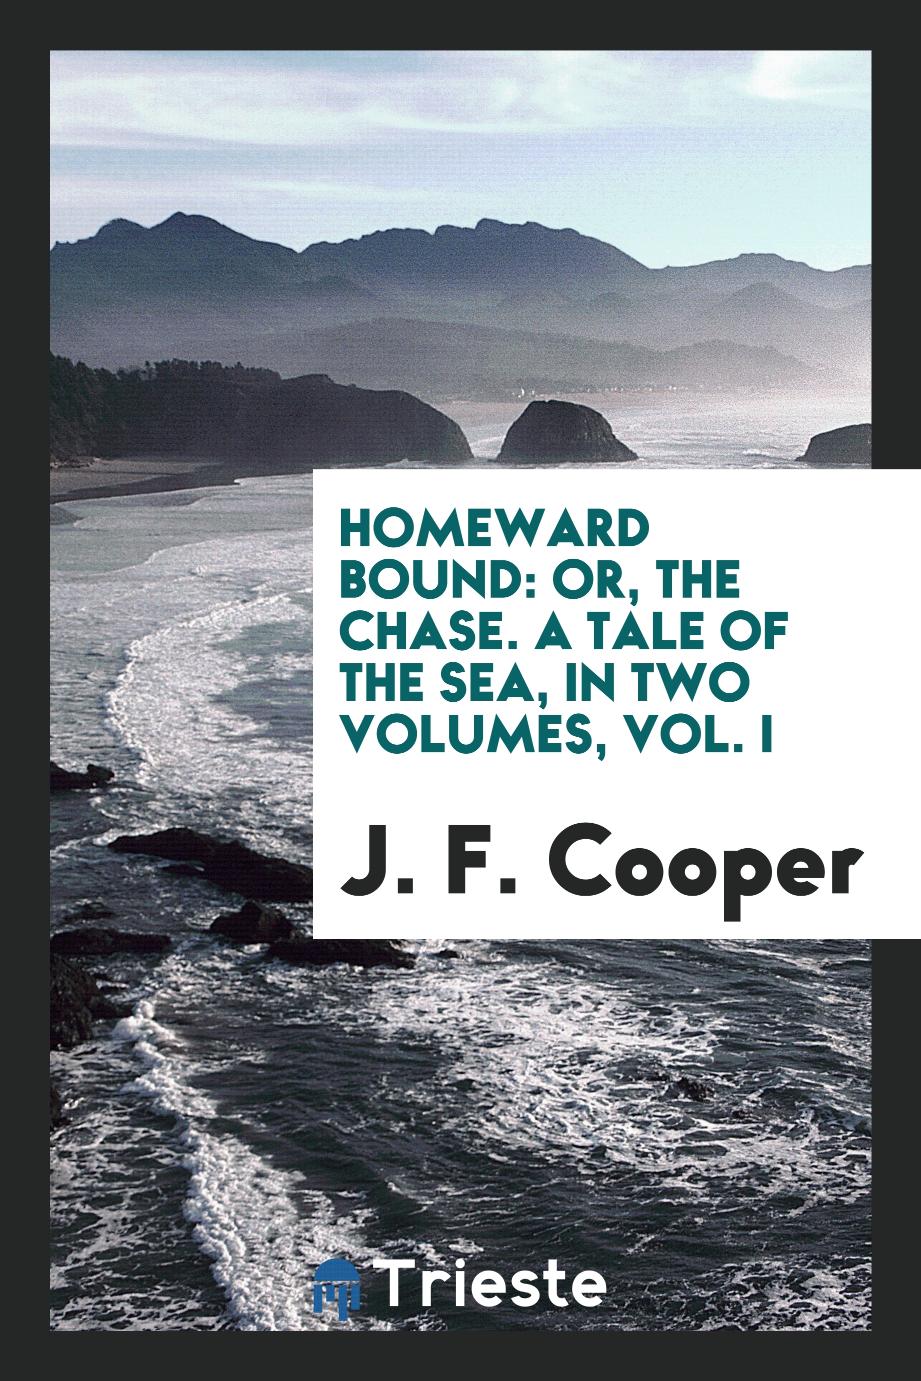 Homeward bound: or, The chase. A tale of the sea, in two volumes, Vol. I